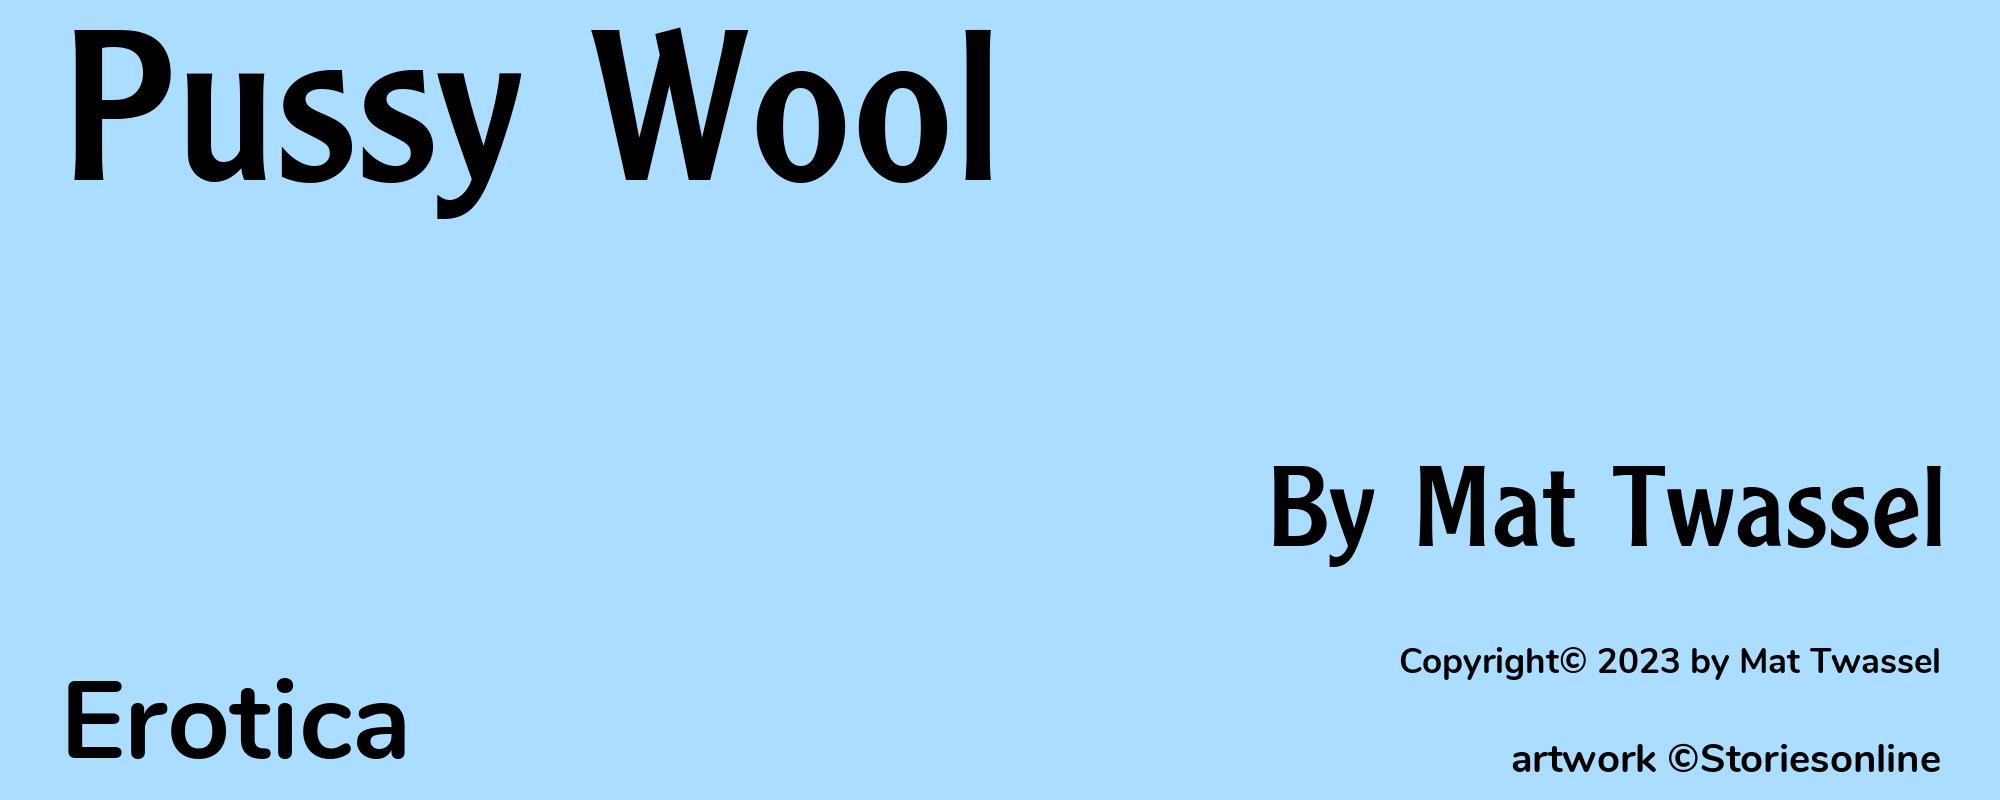 Pussy Wool - Cover